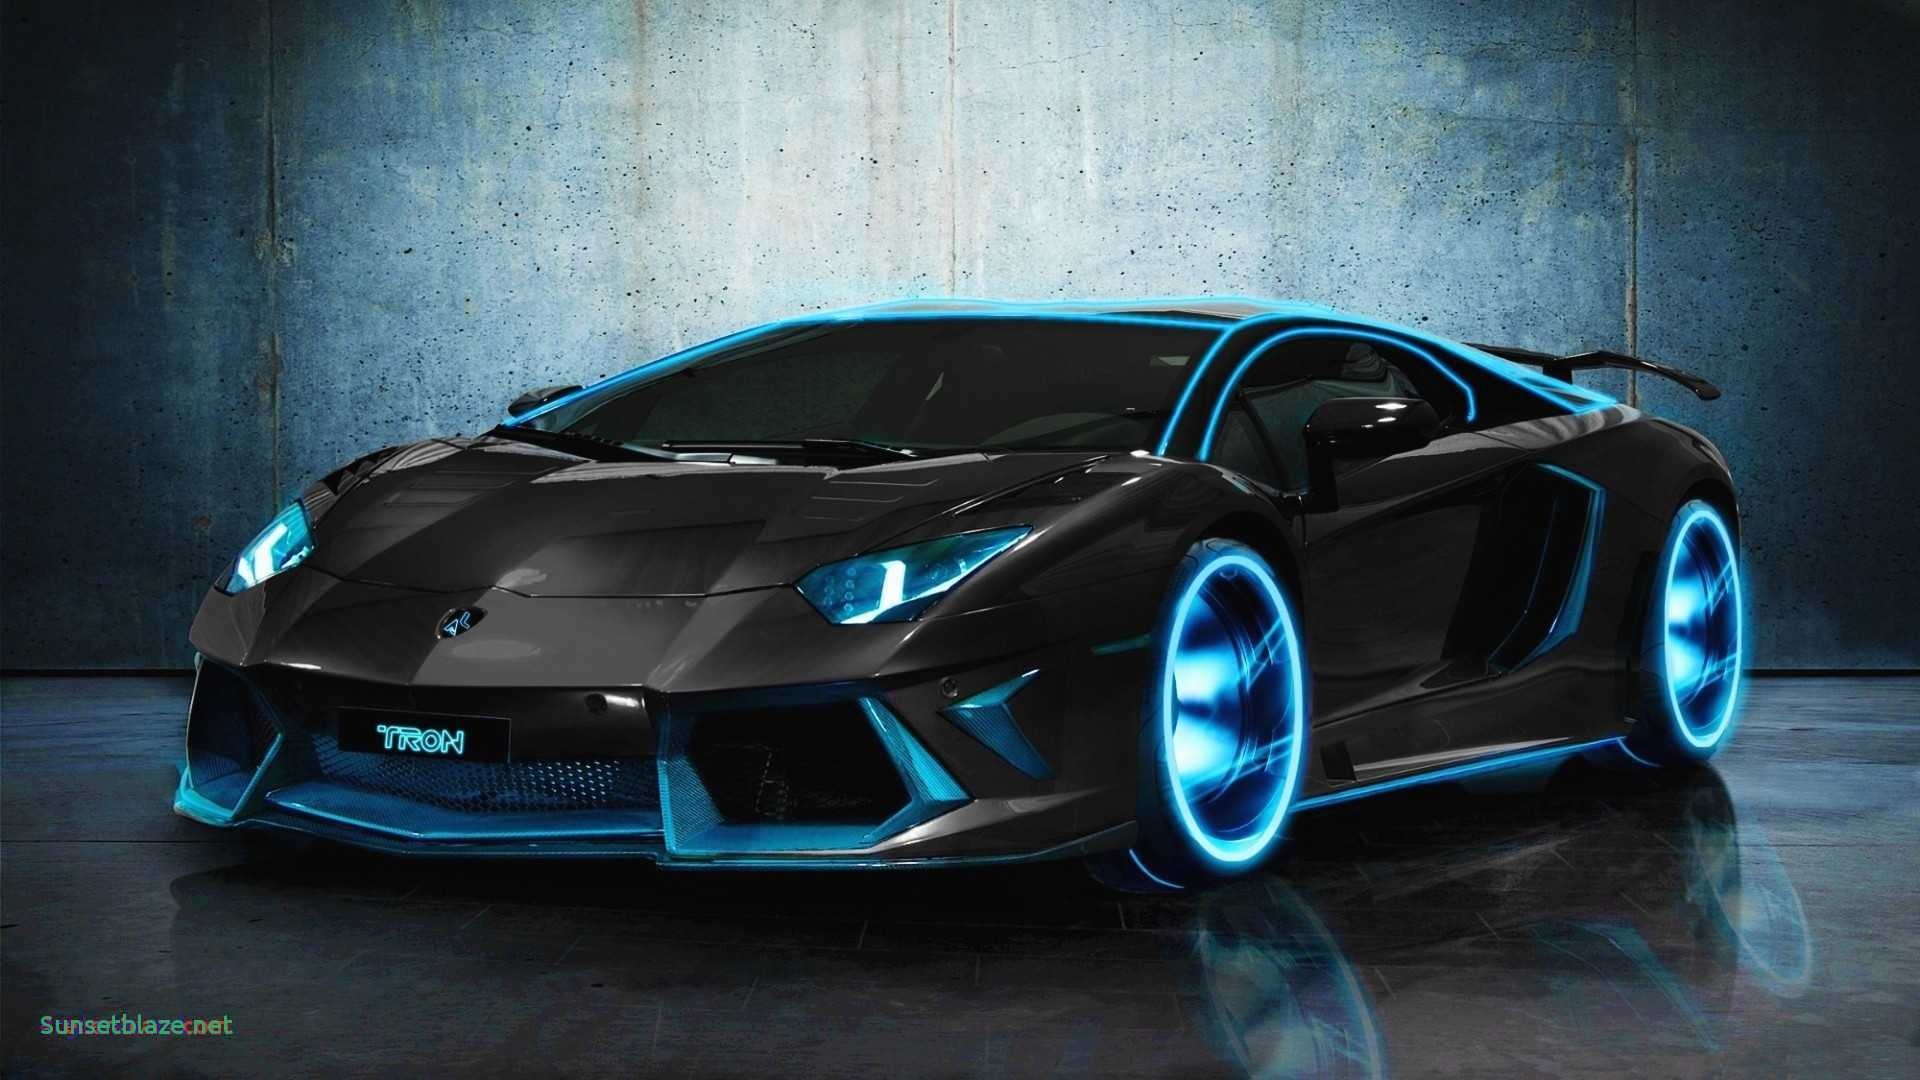 Car For Ipad Wallpapers